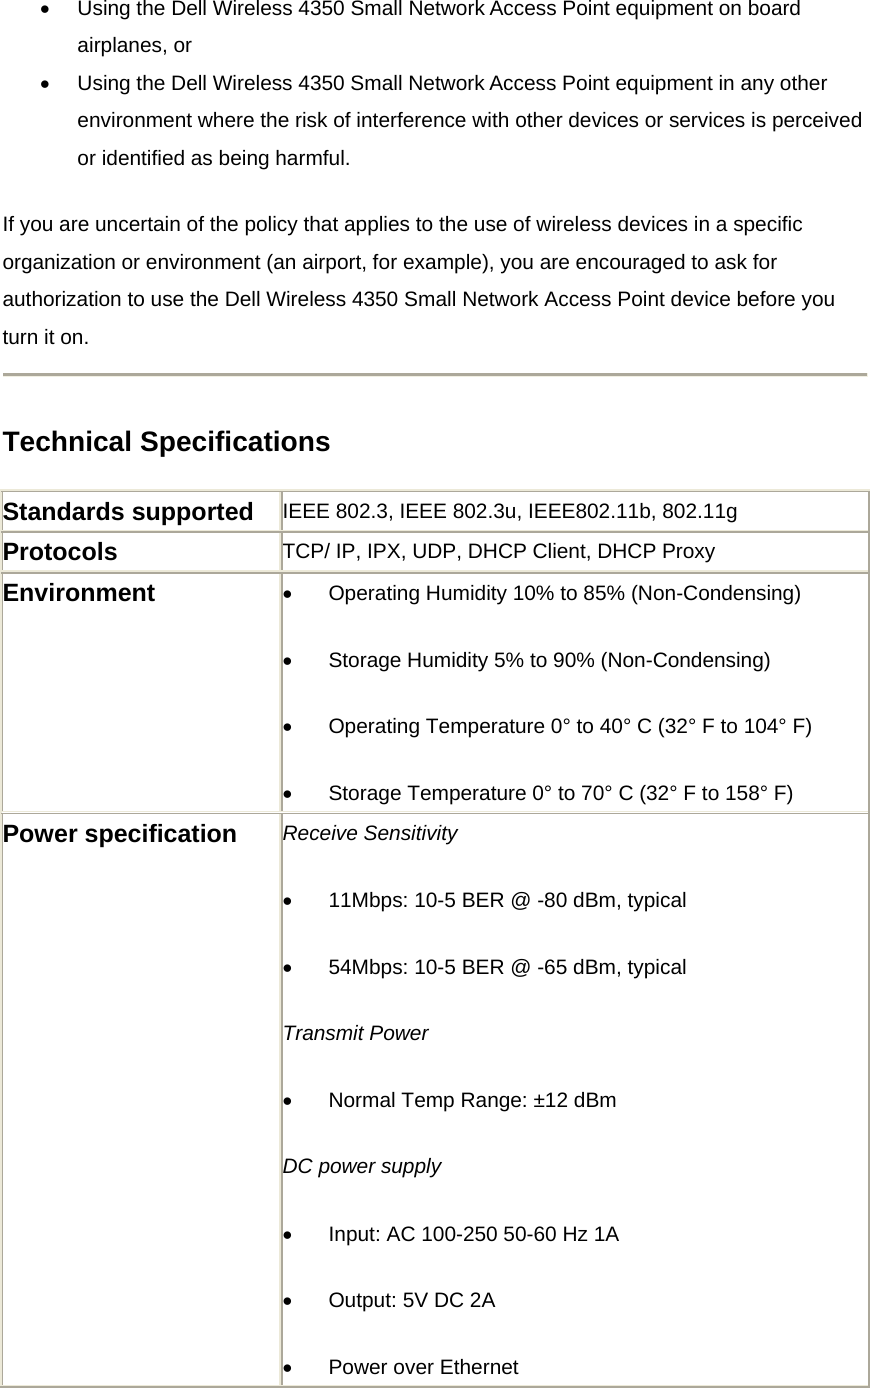 •  Using the Dell Wireless 4350 Small Network Access Point equipment on board airplanes, or   •  Using the Dell Wireless 4350 Small Network Access Point equipment in any other environment where the risk of interference with other devices or services is perceived or identified as being harmful. If you are uncertain of the policy that applies to the use of wireless devices in a specific organization or environment (an airport, for example), you are encouraged to ask for authorization to use the Dell Wireless 4350 Small Network Access Point device before you turn it on.  Technical Specifications Standards supported  IEEE 802.3, IEEE 802.3u, IEEE802.11b, 802.11g Protocols  TCP/ IP, IPX, UDP, DHCP Client, DHCP Proxy Environment  •          Operating Humidity 10% to 85% (Non-Condensing) •          Storage Humidity 5% to 90% (Non-Condensing) •          Operating Temperature 0° to 40° C (32° F to 104° F) •          Storage Temperature 0° to 70° C (32° F to 158° F) Power specification    Receive Sensitivity •          11Mbps: 10-5 BER @ -80 dBm, typical •          54Mbps: 10-5 BER @ -65 dBm, typical Transmit Power •          Normal Temp Range: ±12 dBm DC power supply •          Input: AC 100-250 50-60 Hz 1A •          Output: 5V DC 2A •          Power over Ethernet 